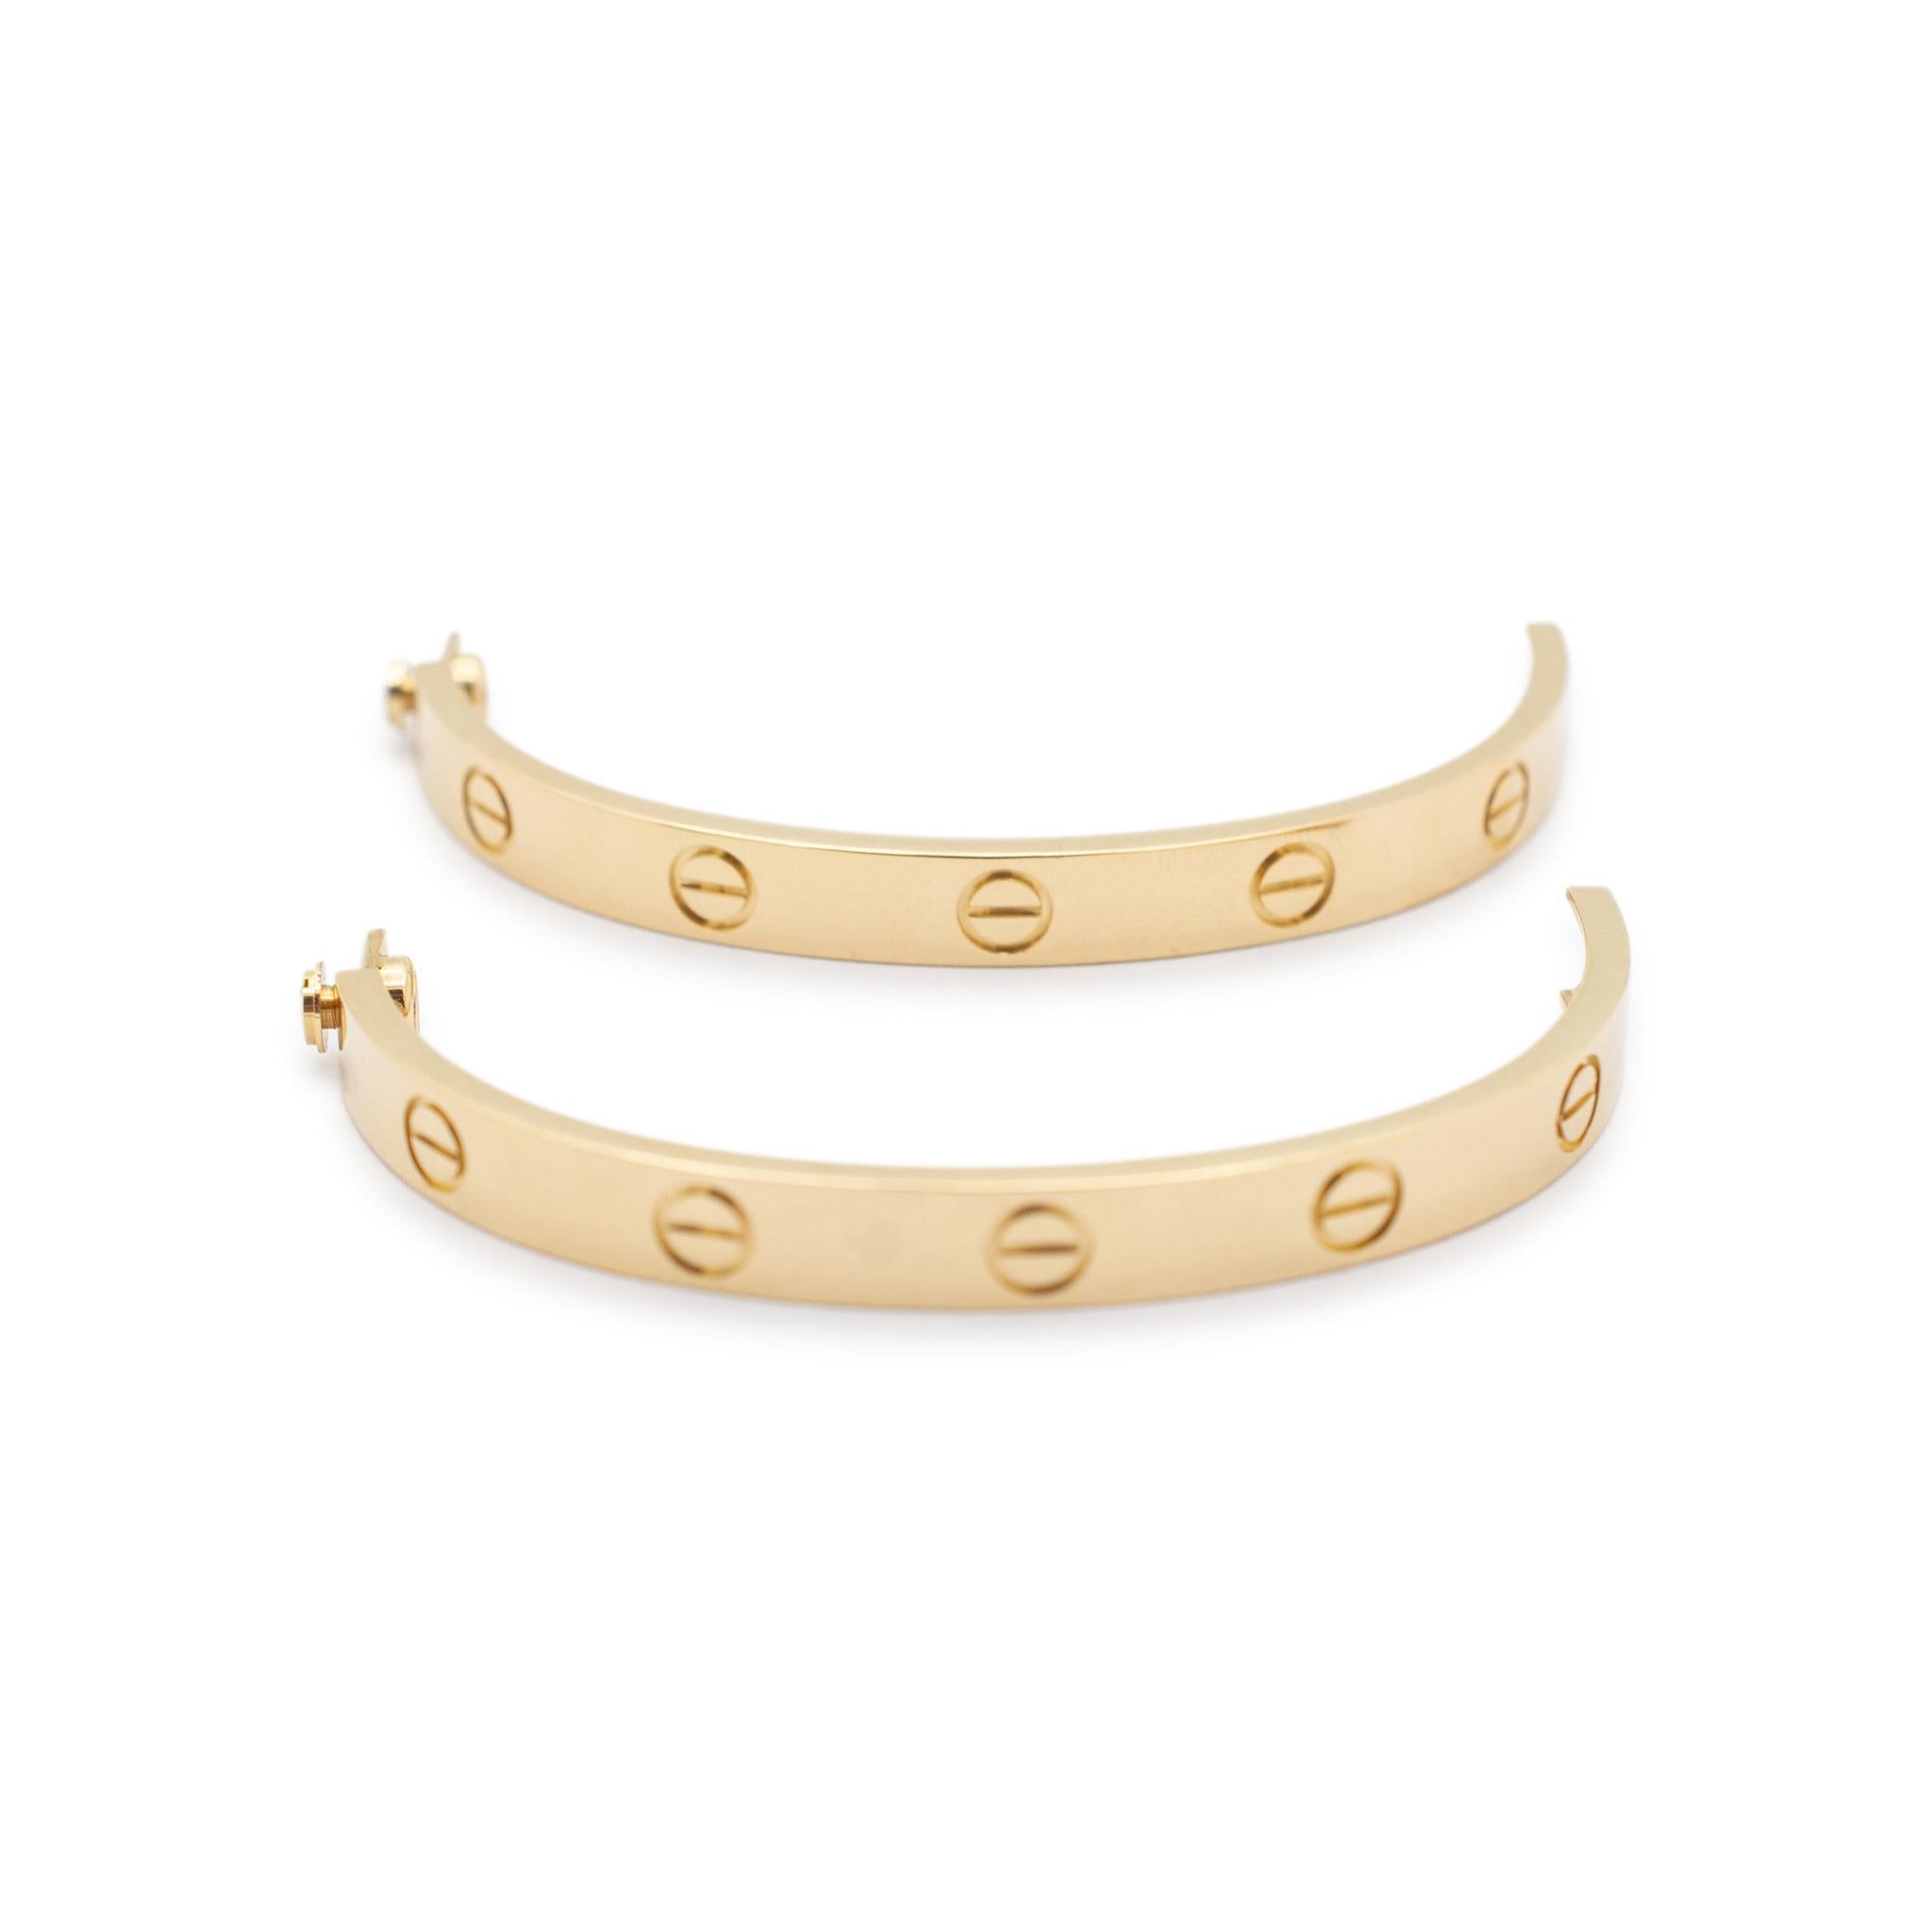 Brand: Cartier 

Gender: Ladies 

Metal Type: 18K Yellow Gold

Length: 5.75 inches

Cartier size: 16

Width: 6.10 mm 

Weight: 30.20 grams

18K yellow gold bangle bracelet. The metal was tested and determined to be 18K yellow gold. Engraved with